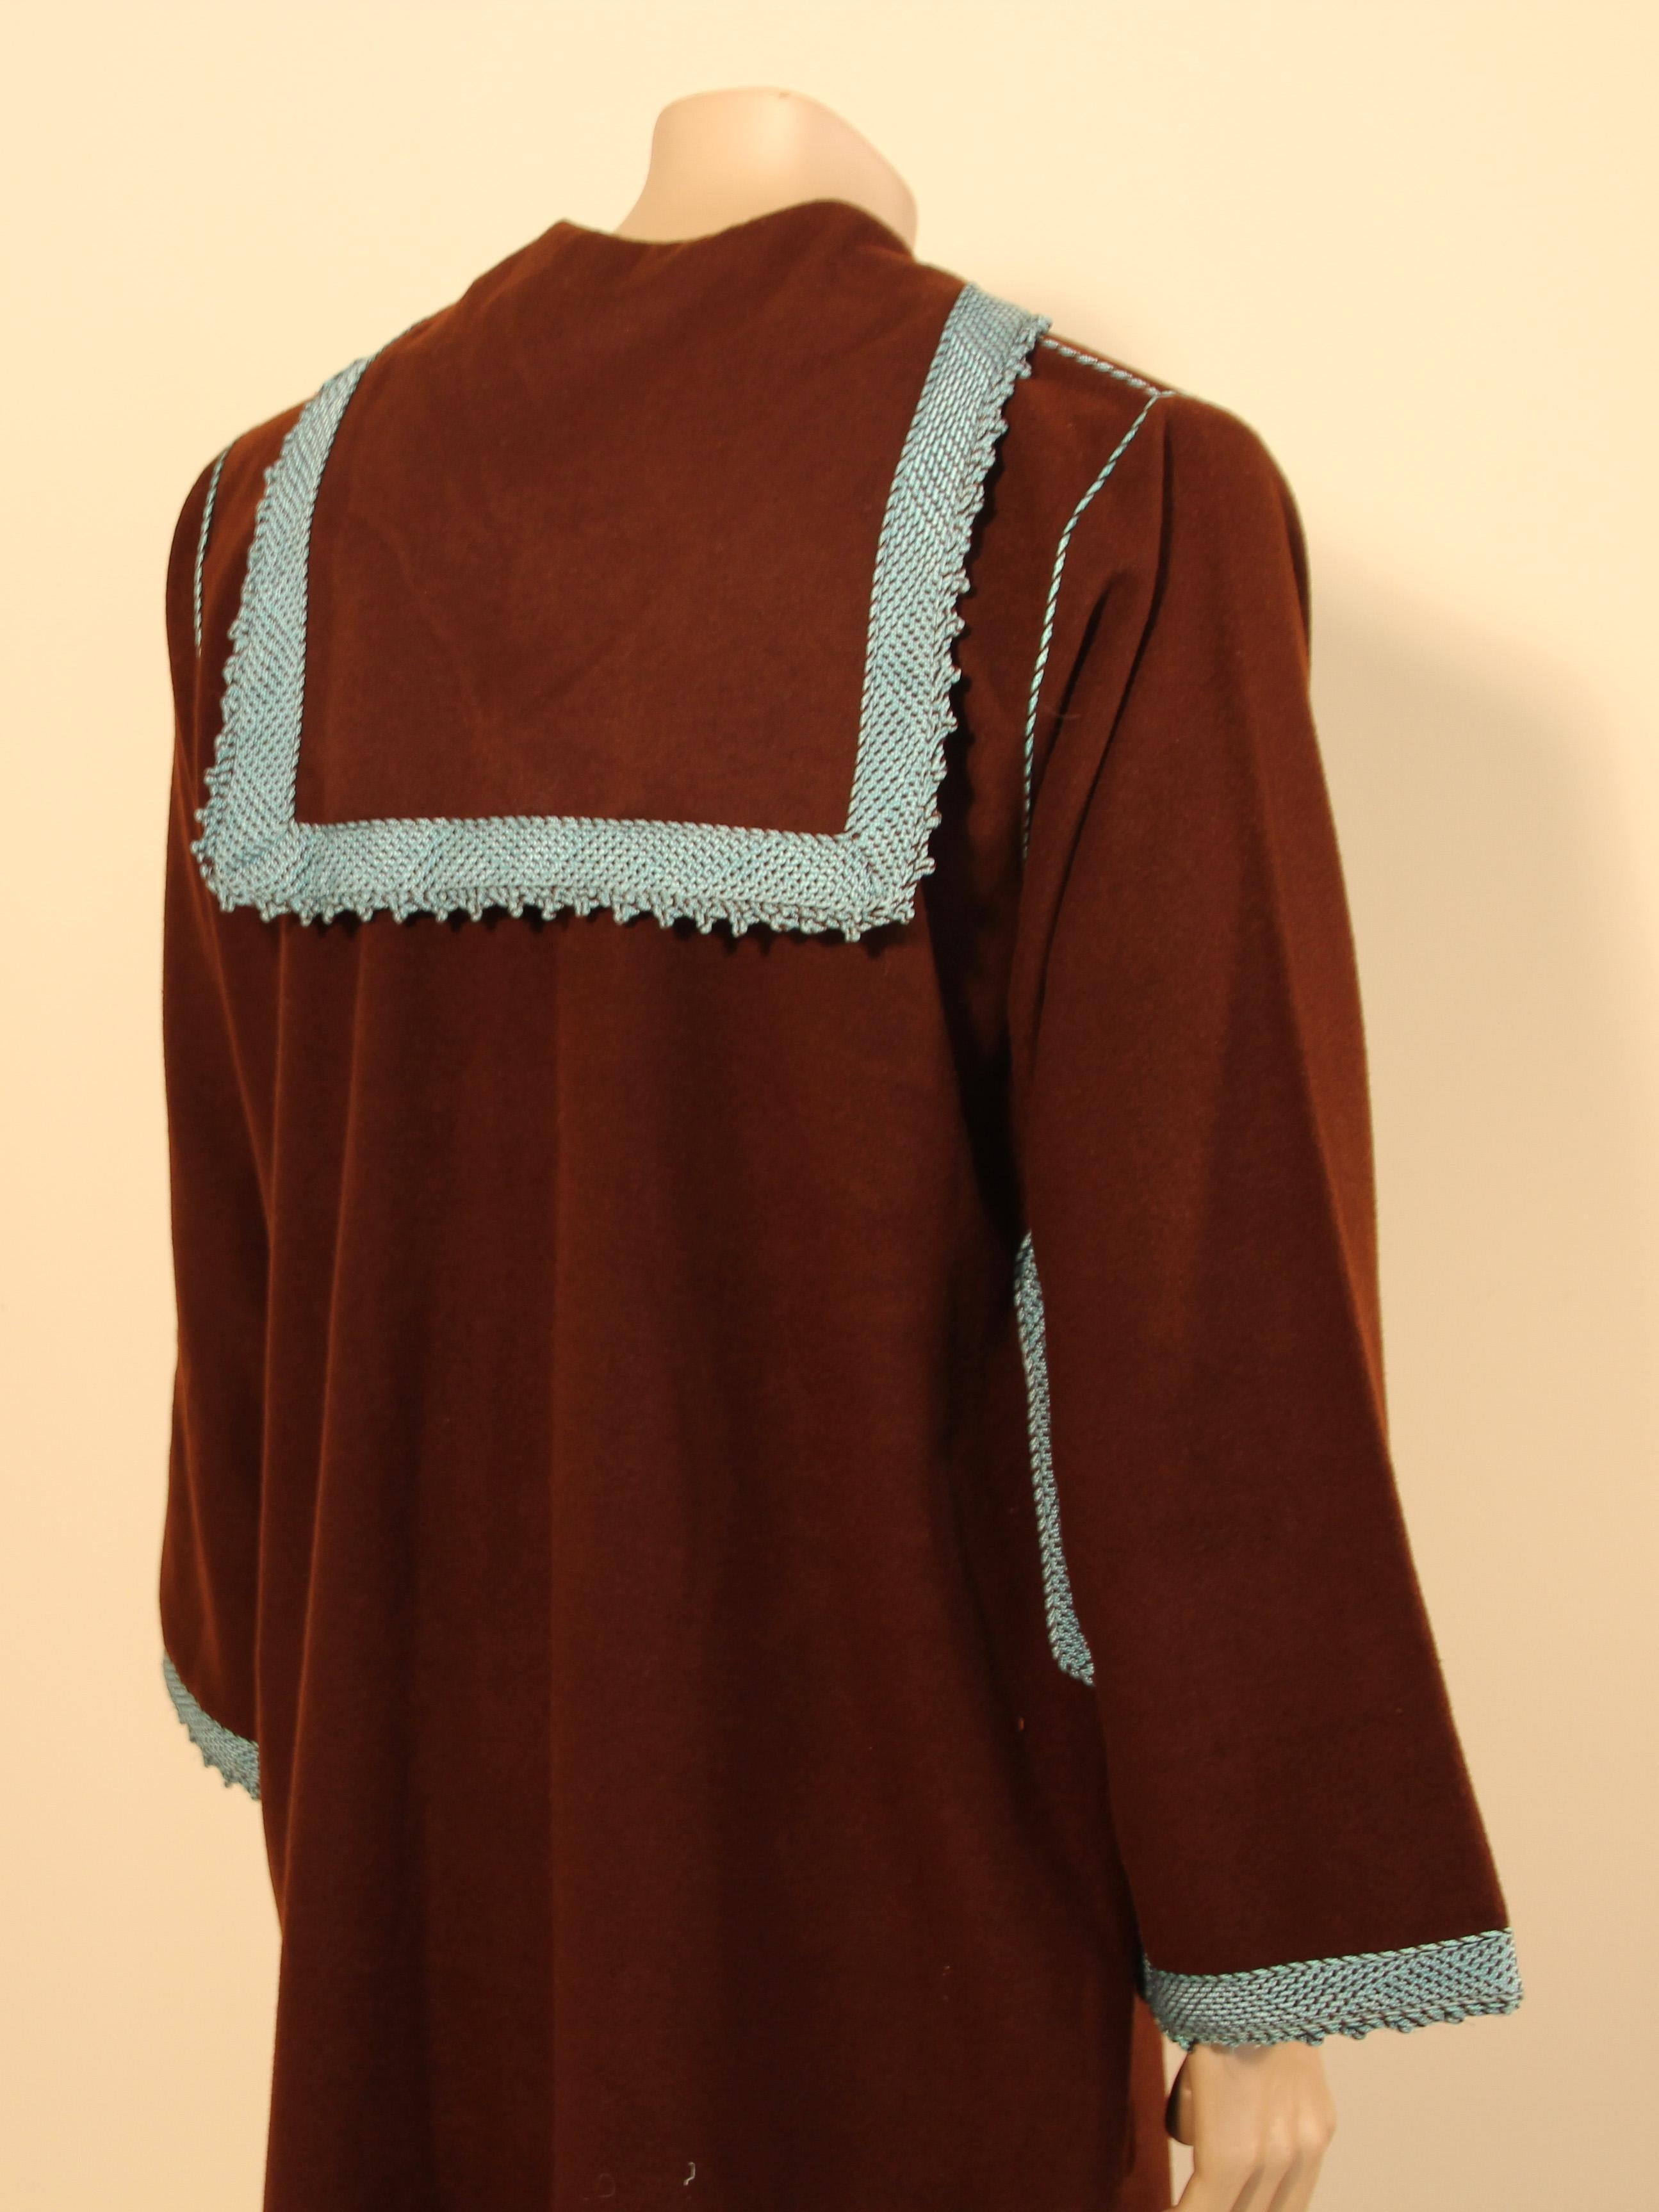 Cashmere Brown and Turquoise Caftan 1980s Robe For Sale 1